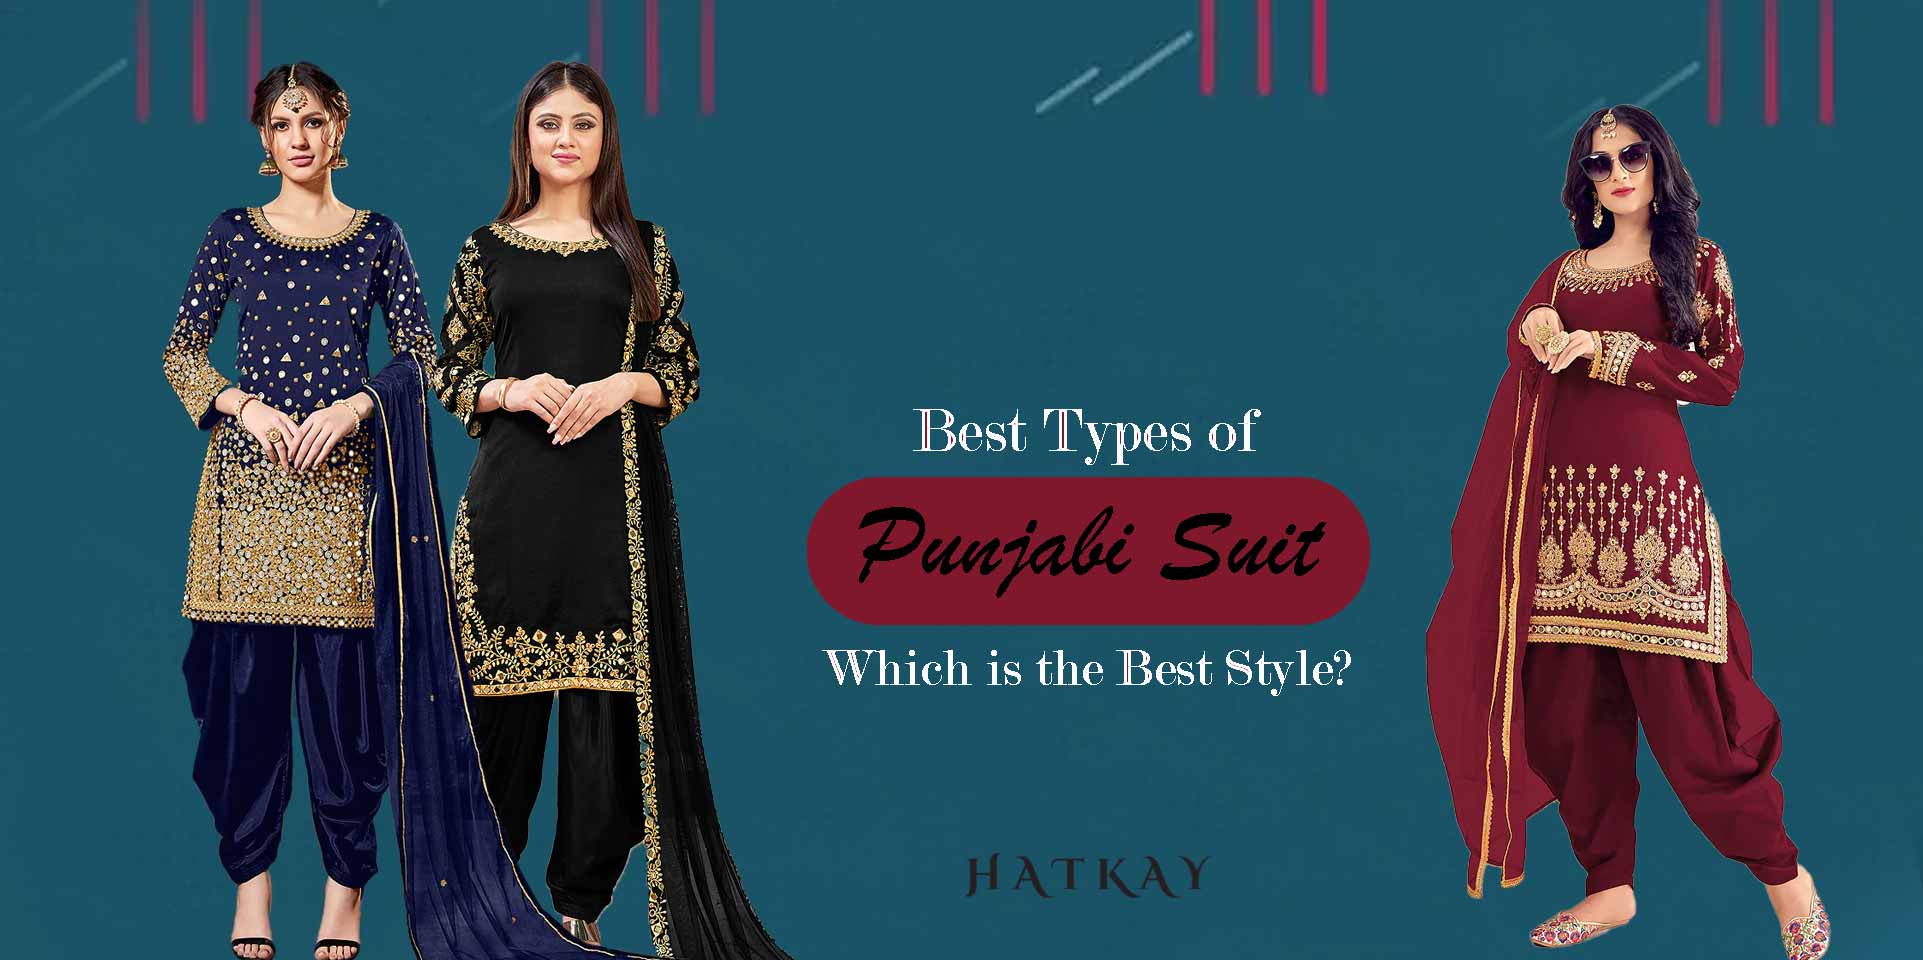 How Many Types of Punjabi Suit Styles are There? Which is the Best Punjabi Suit Style?